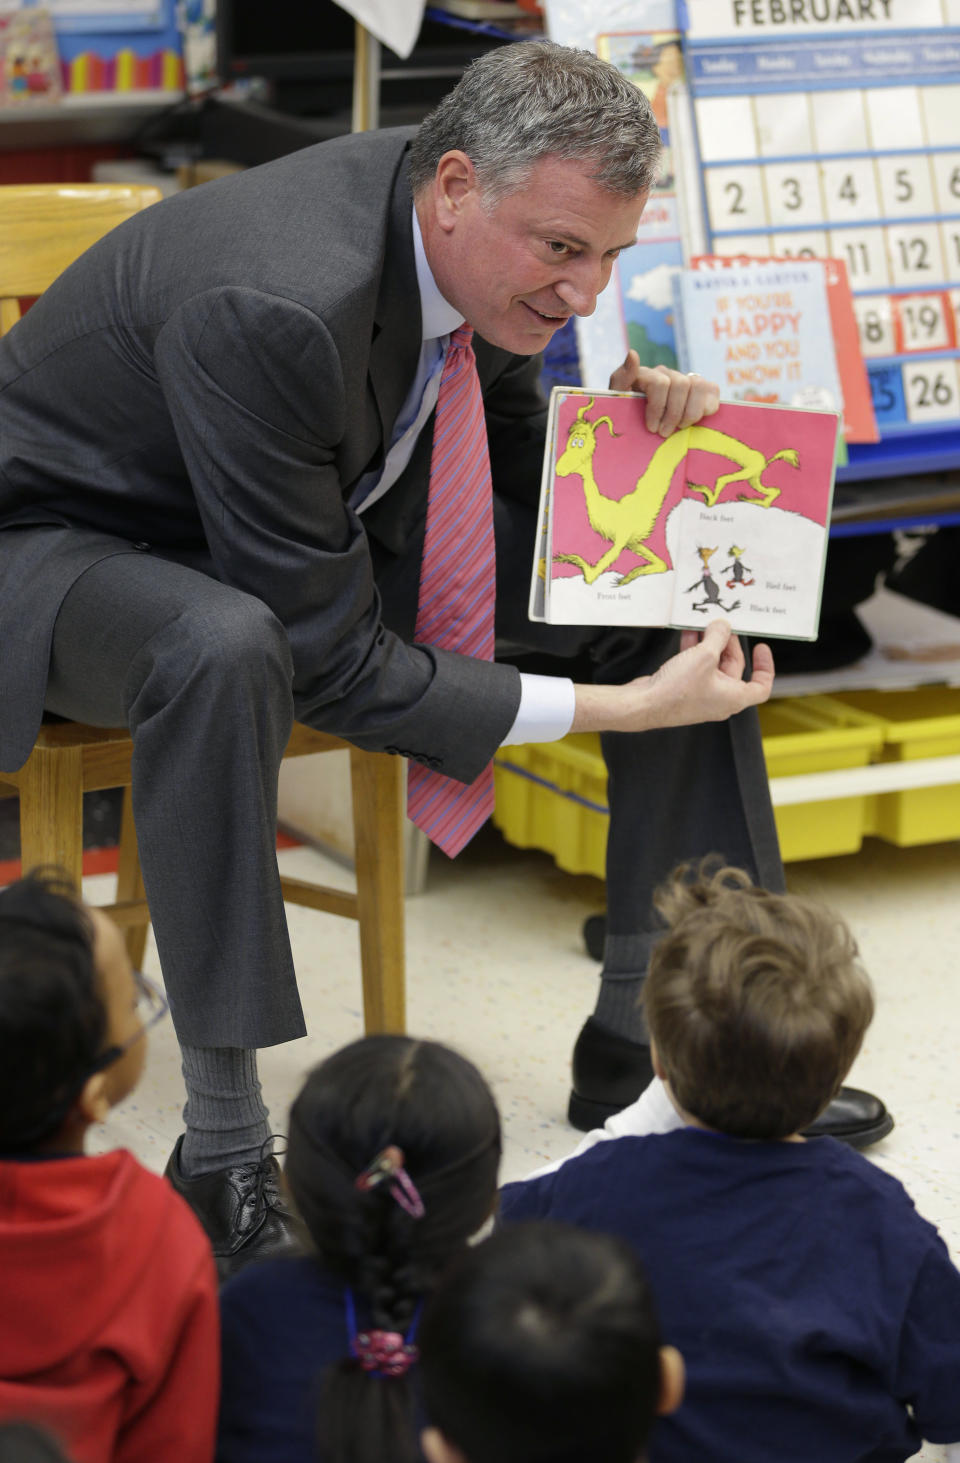 FILE - In this Feb. 25, 2014, file photo, New York City Mayor Bill de Blasio reads to children in a pre-kindergarten class at P.S. 130 in New York. De Blasio’s first 100 days as mayor of New York were marked in nearly equal measures by accomplishing campaign goals and committing political blunders. Most of his time and energy was devoted to a single issue, his central campaign promise to create universal pre-kindergarten and fund it with a tax on wealthy New Yorkers. That bruising fight resulted in a partial victory and defined de Blasio’s first months in office. (AP Photo/Seth Wenig, File)